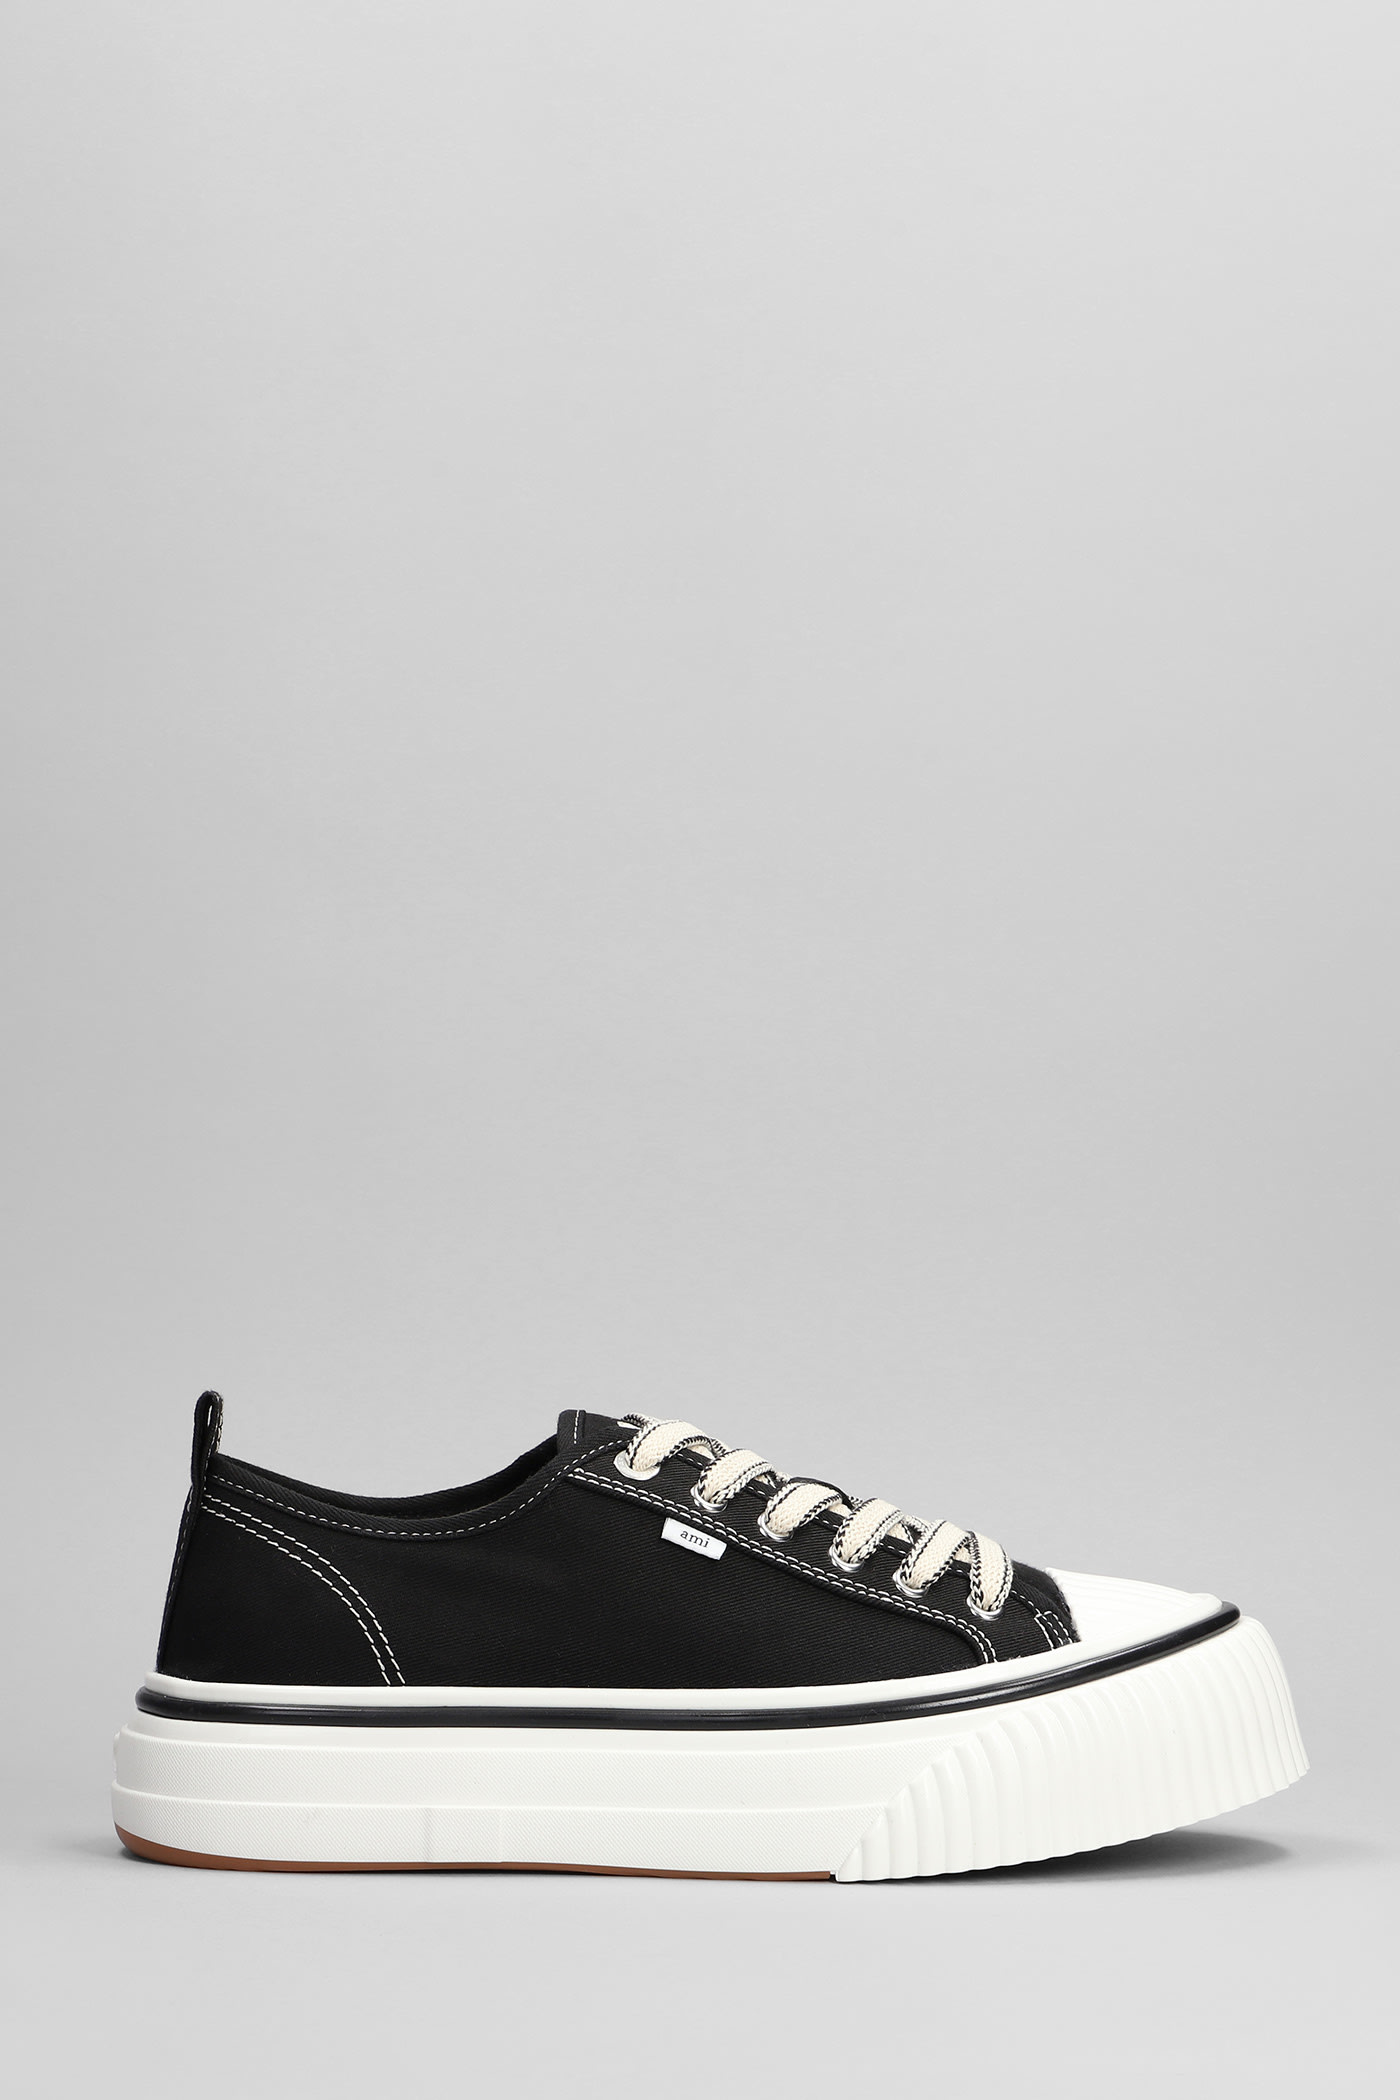 Sneakers In Black Cotton